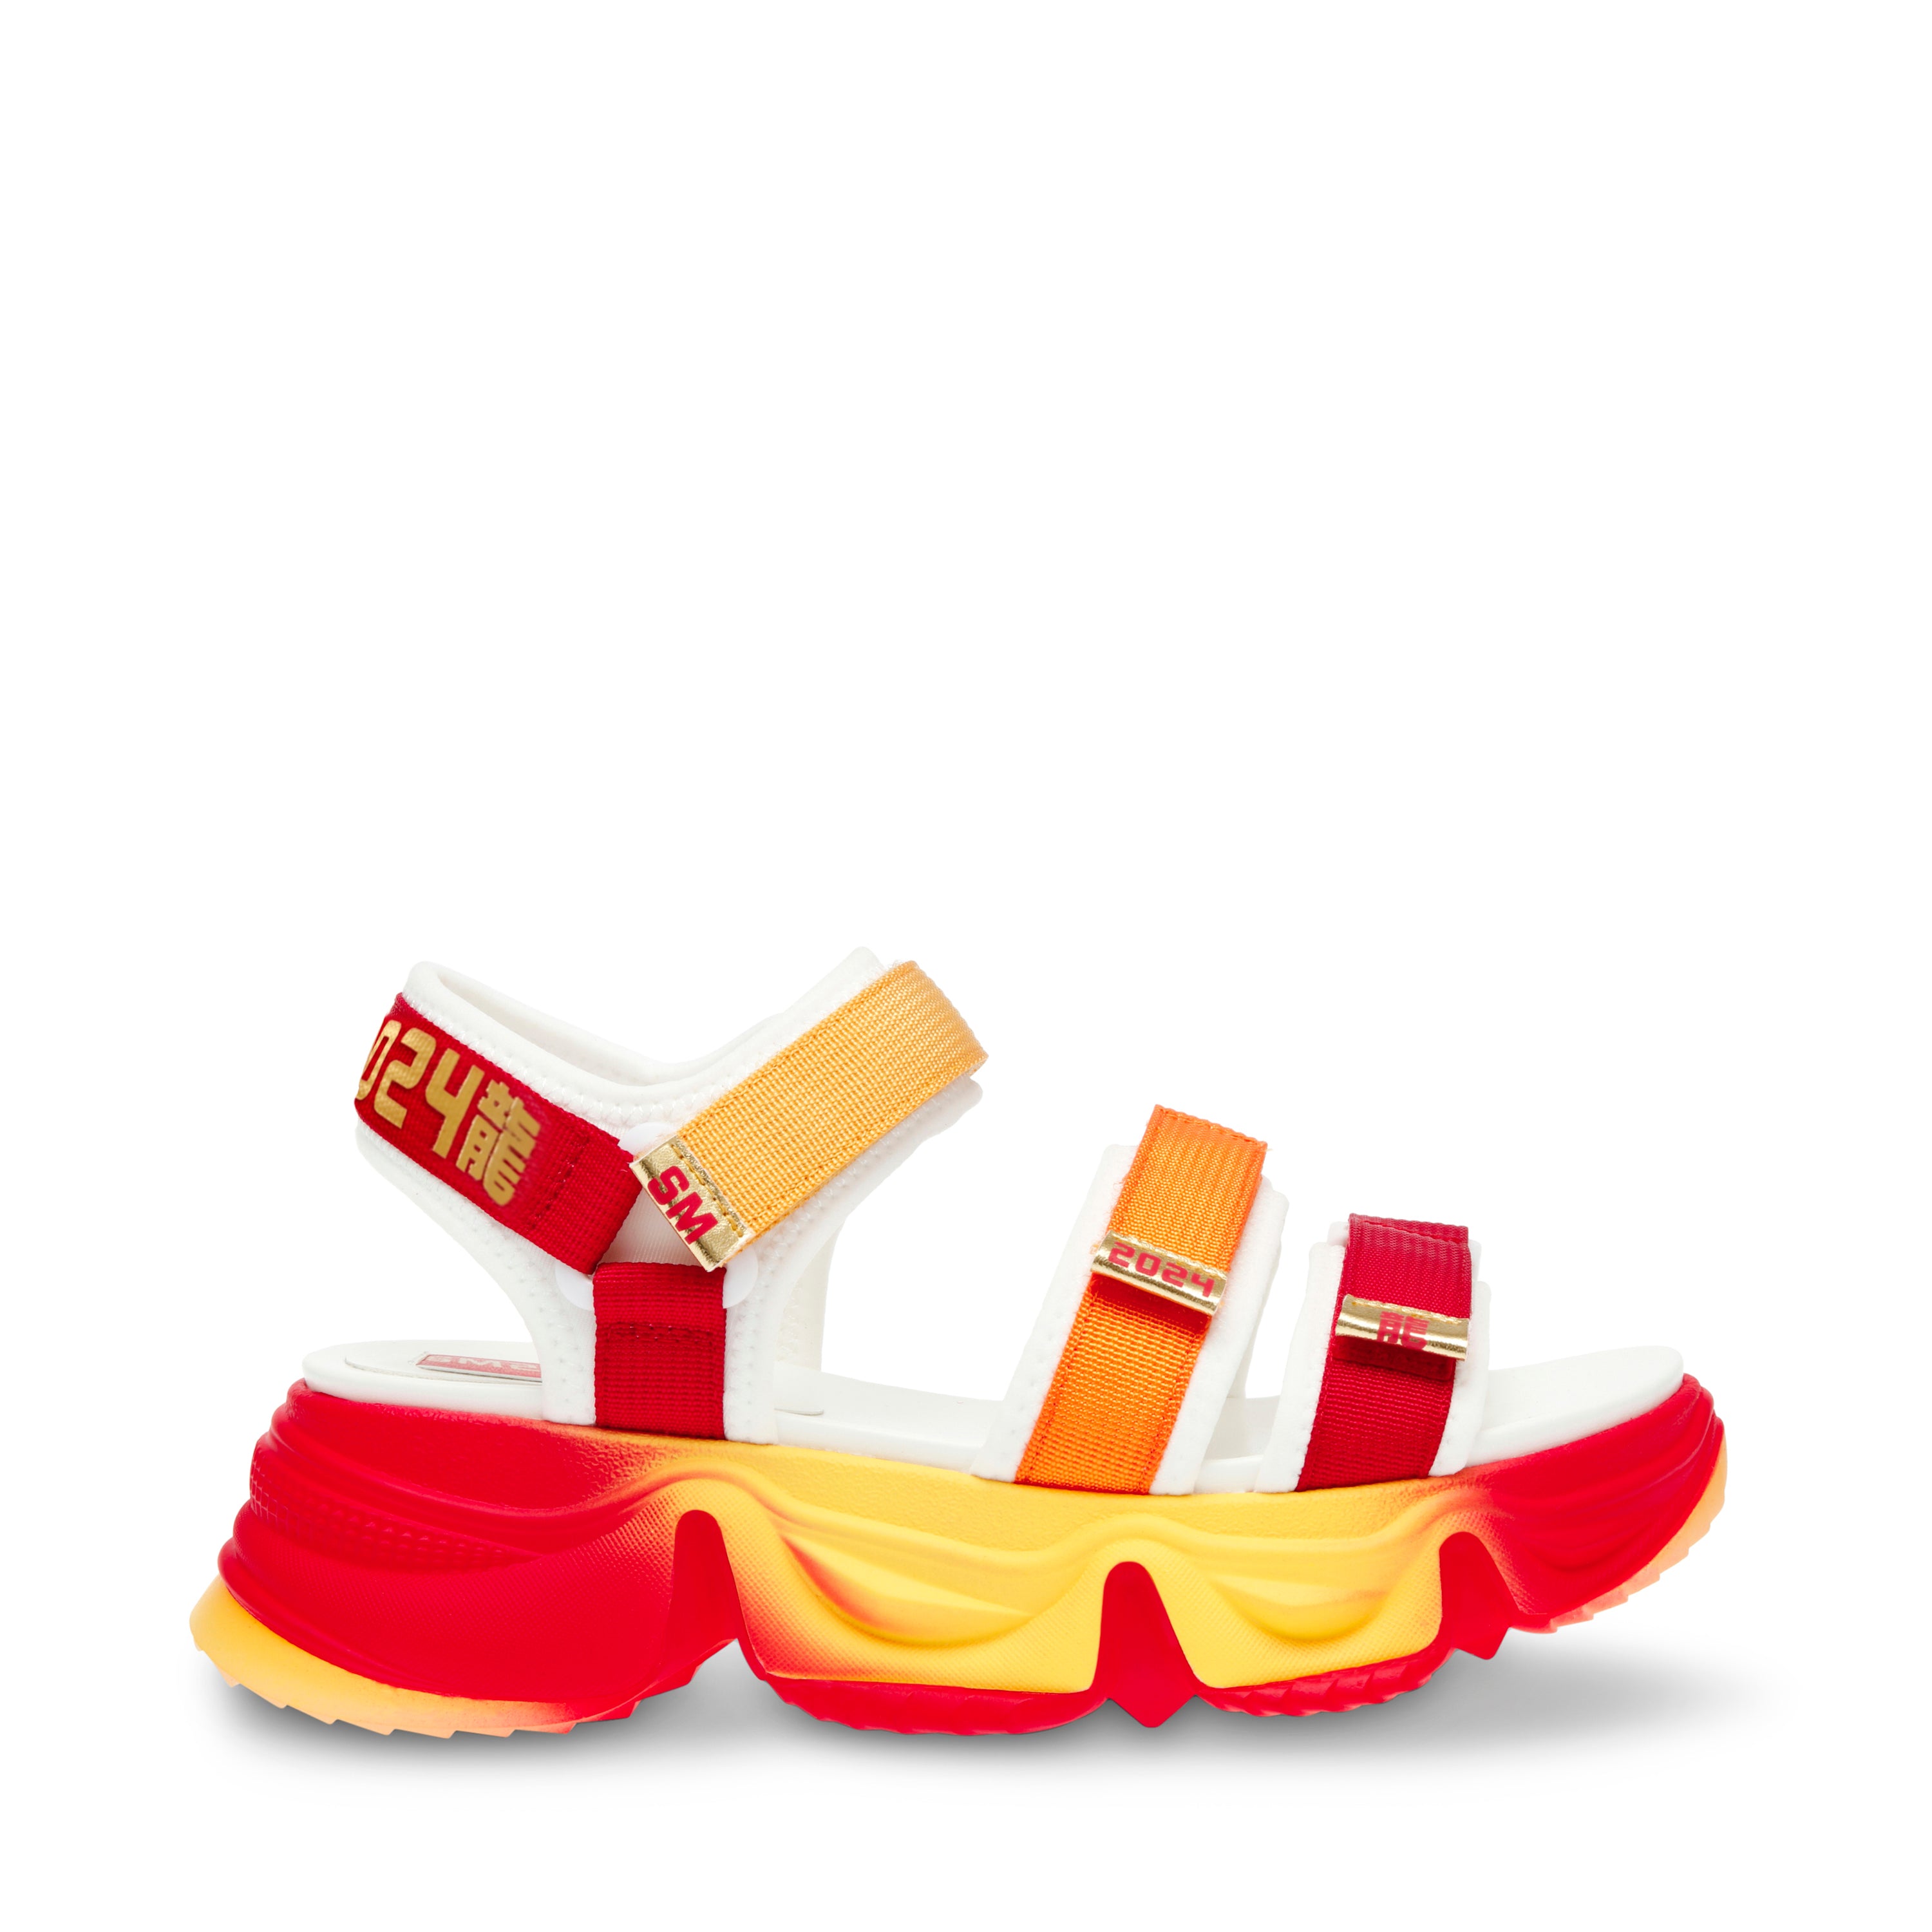 [DRAGON COLLECTION] CHAKRA RED/GOLD SANDALS